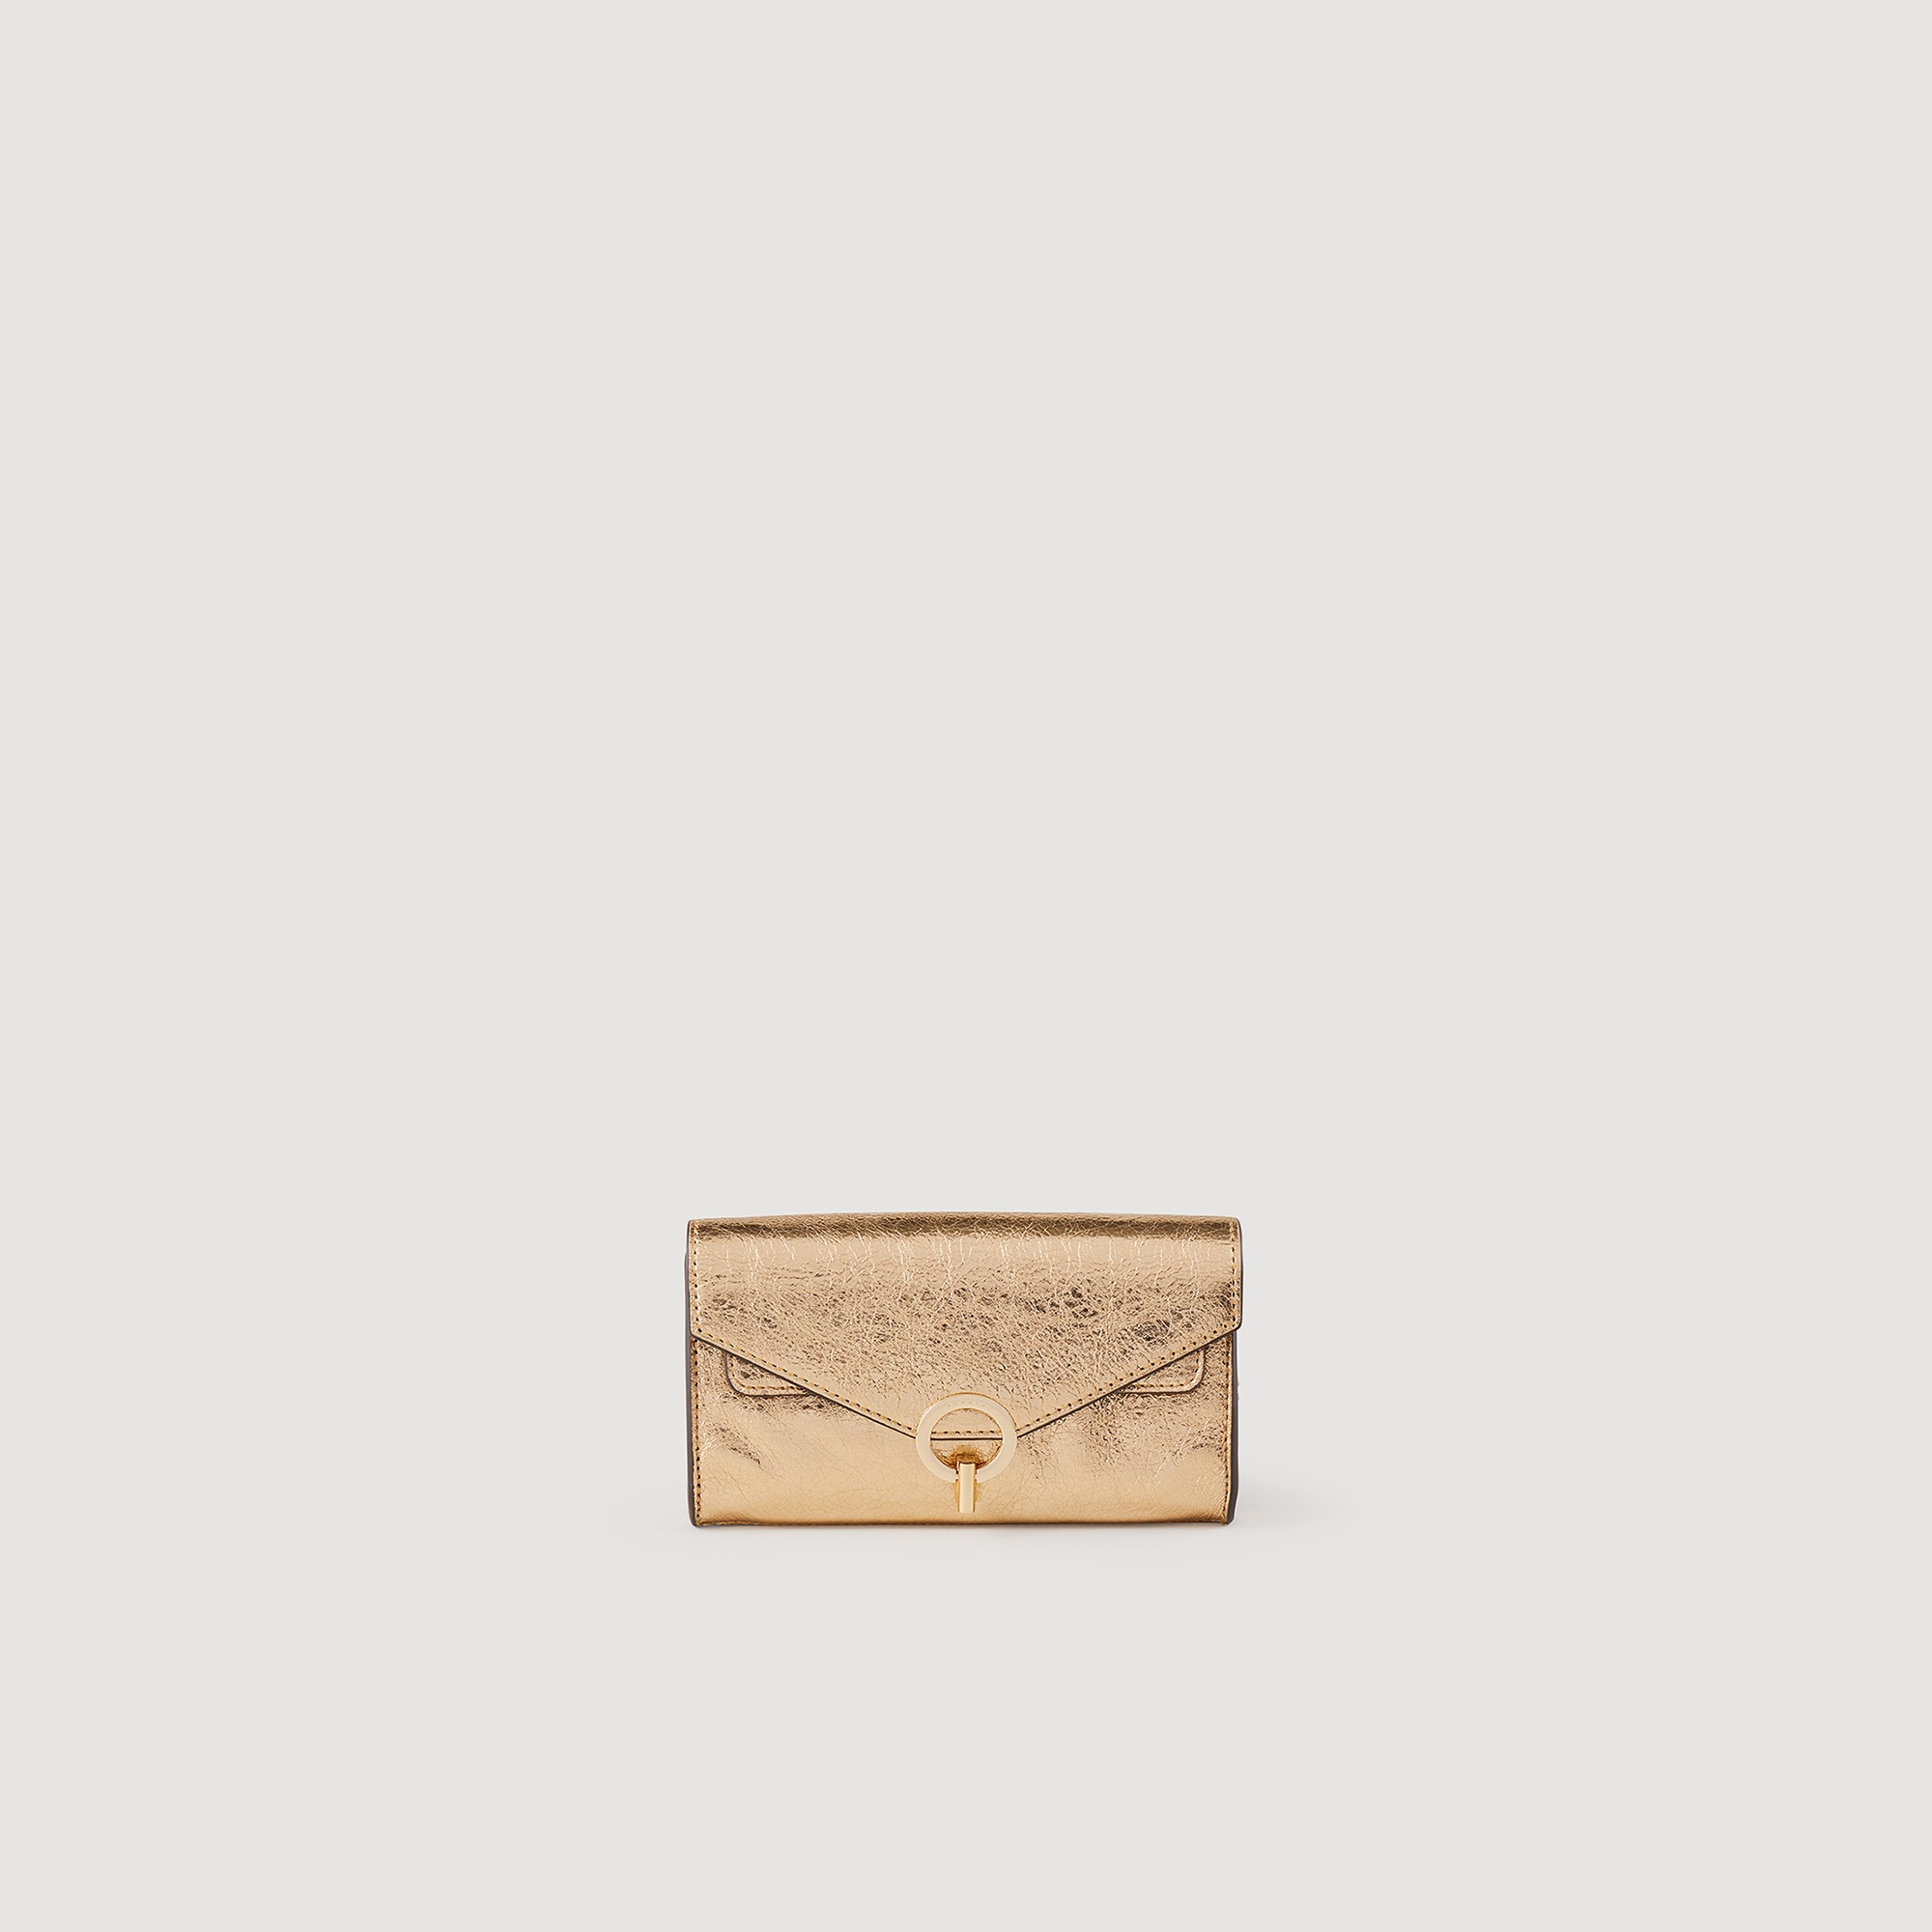 Gold leather clutch bag - 3